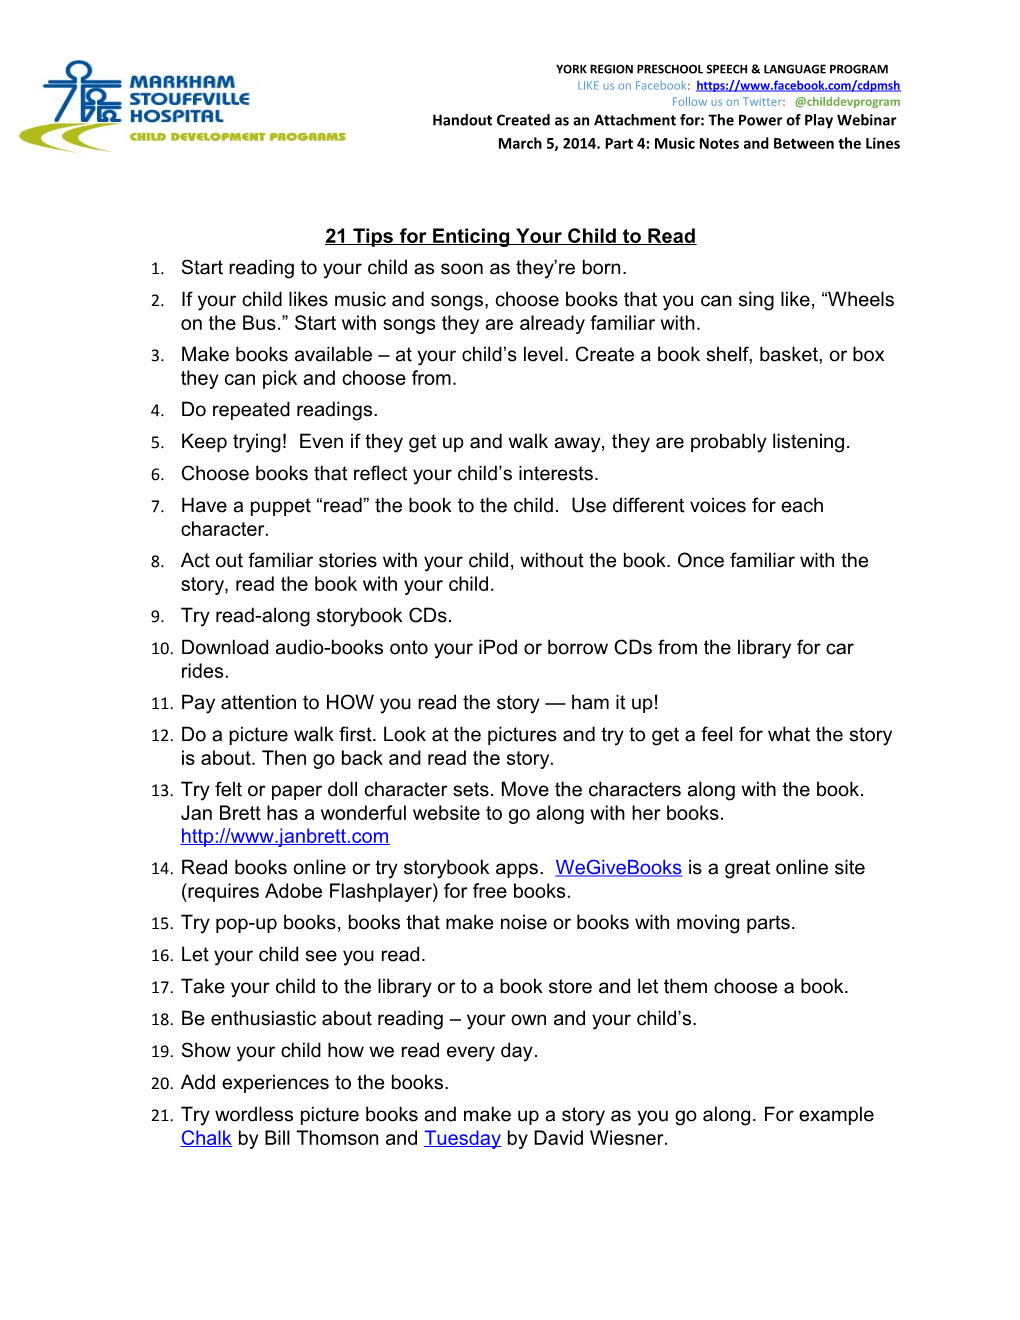 Handout Created As an Attachment For: the Power of Play Webinar